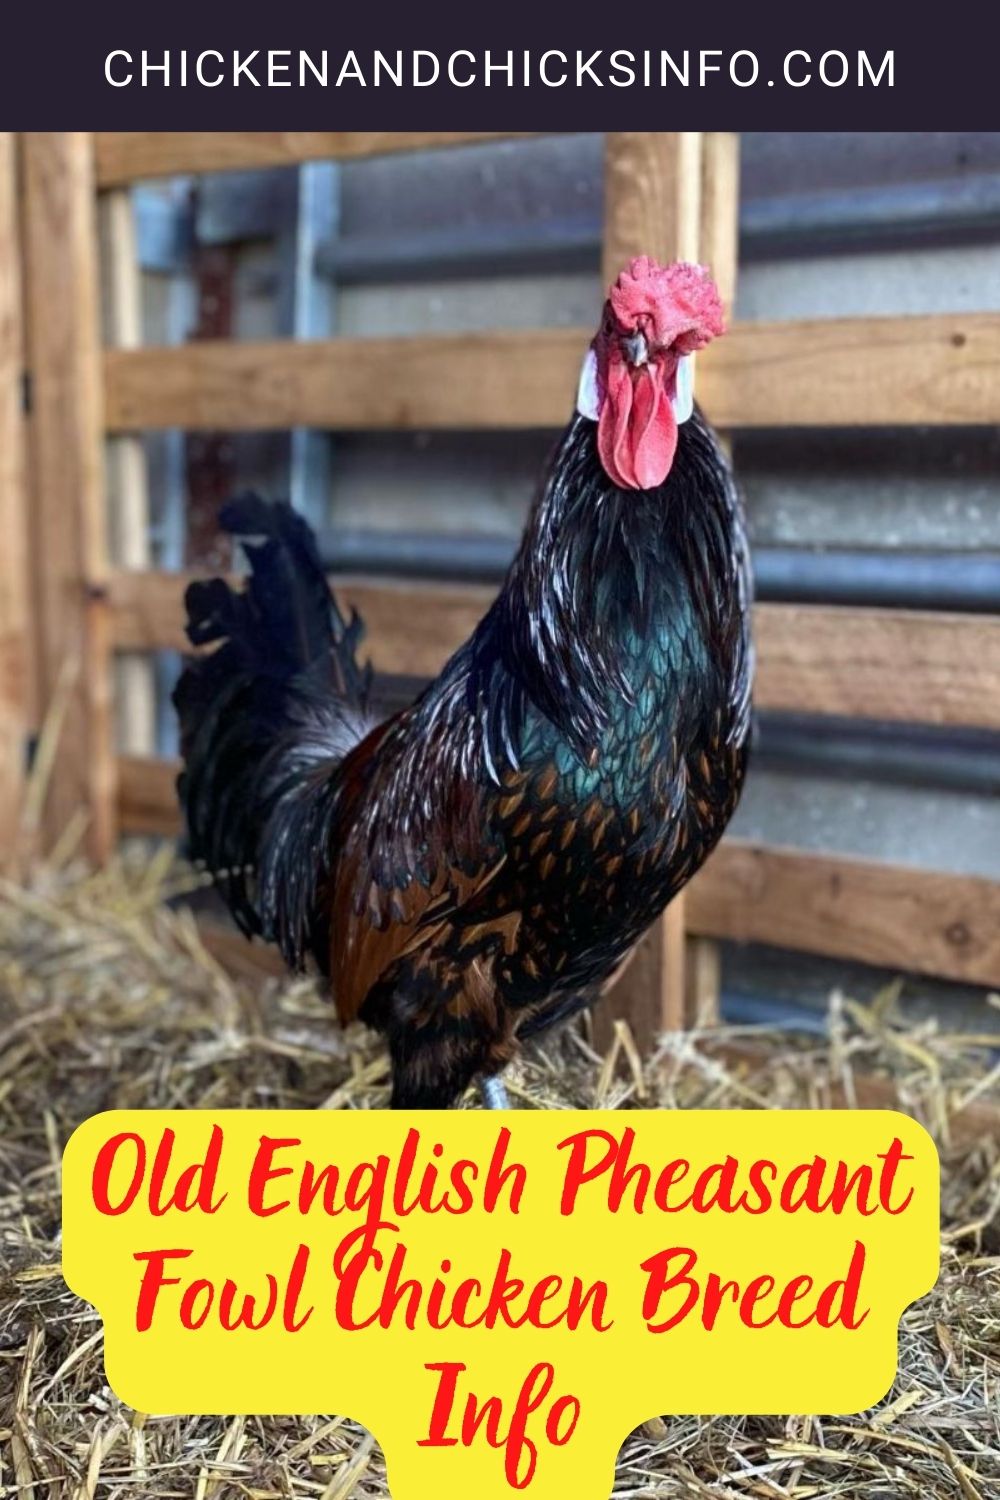 Old English Pheasant Fowl Chicken Breed Info pinterest image.